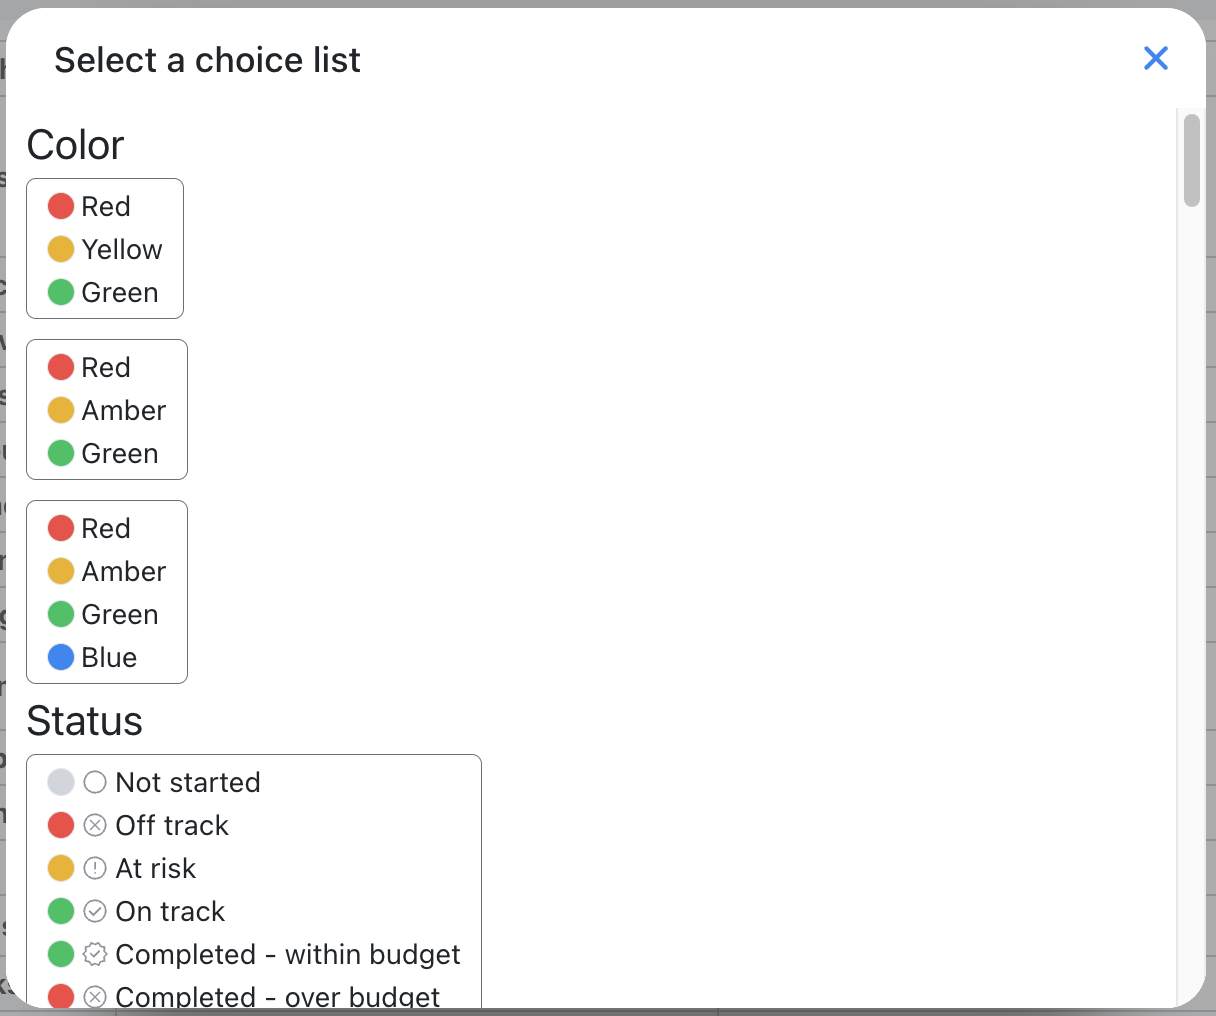 Text Choices field